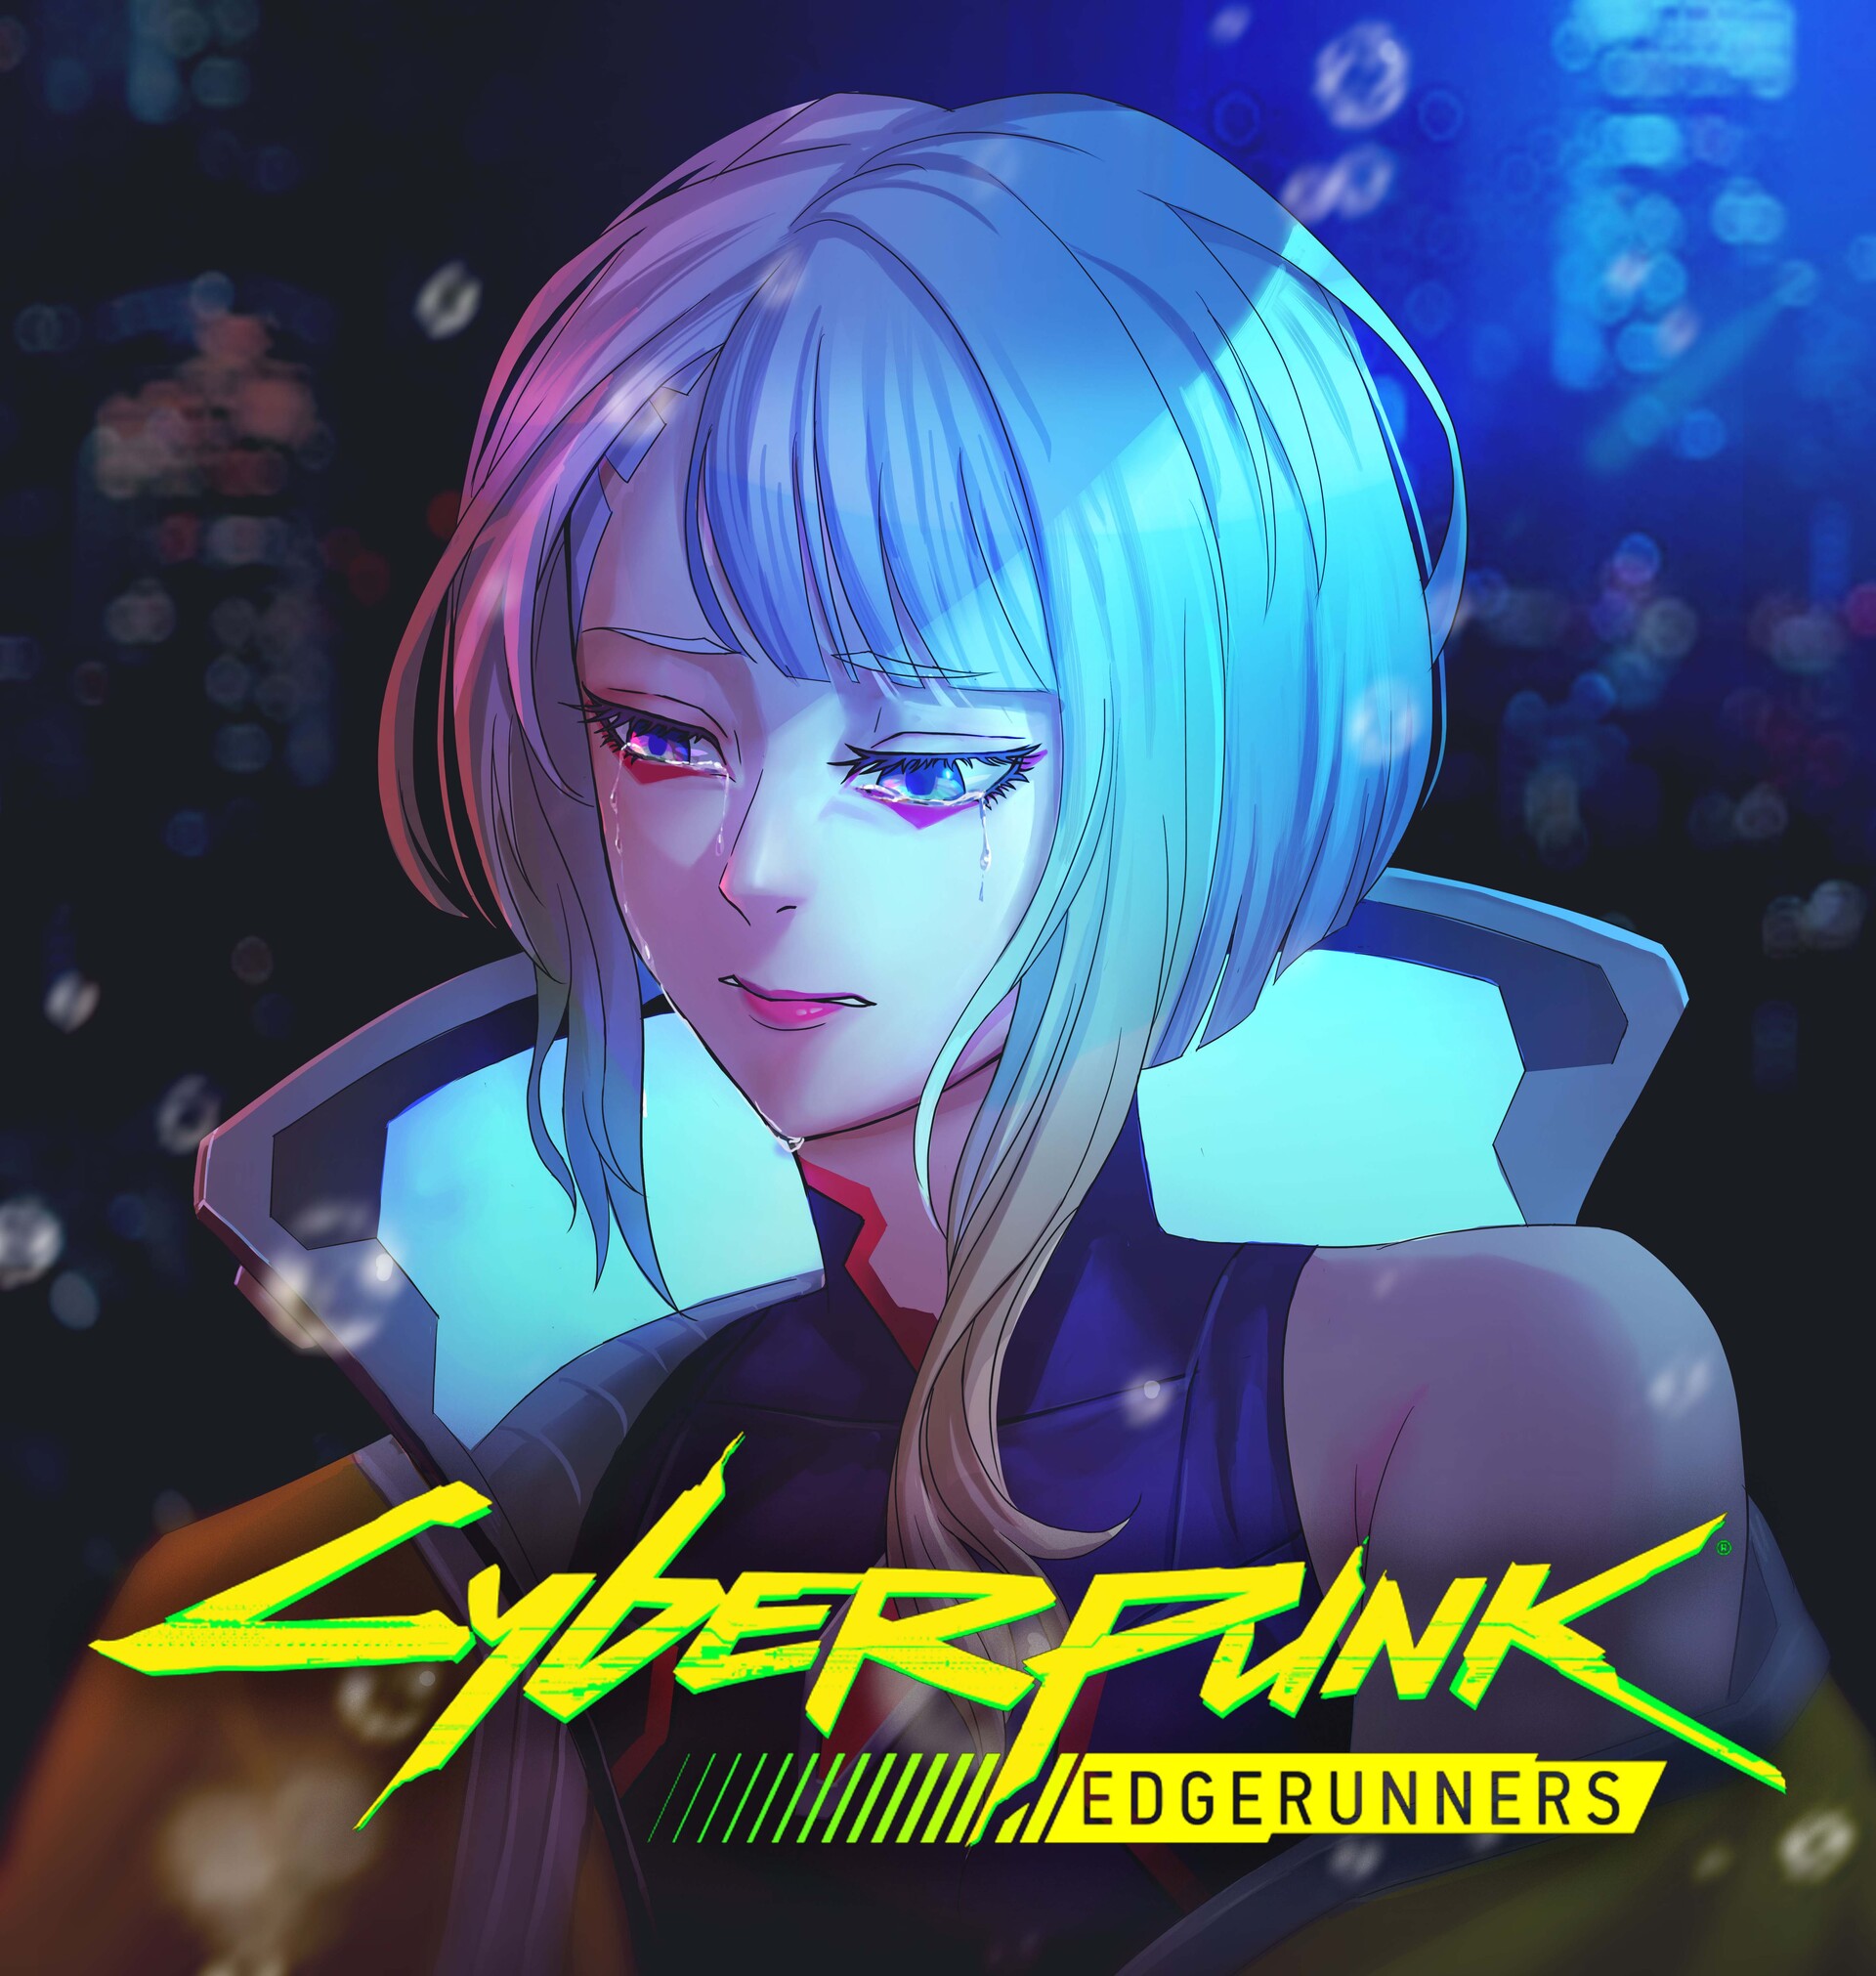 Lam Thach - Lucy crying Cyberpunk Edgerunners